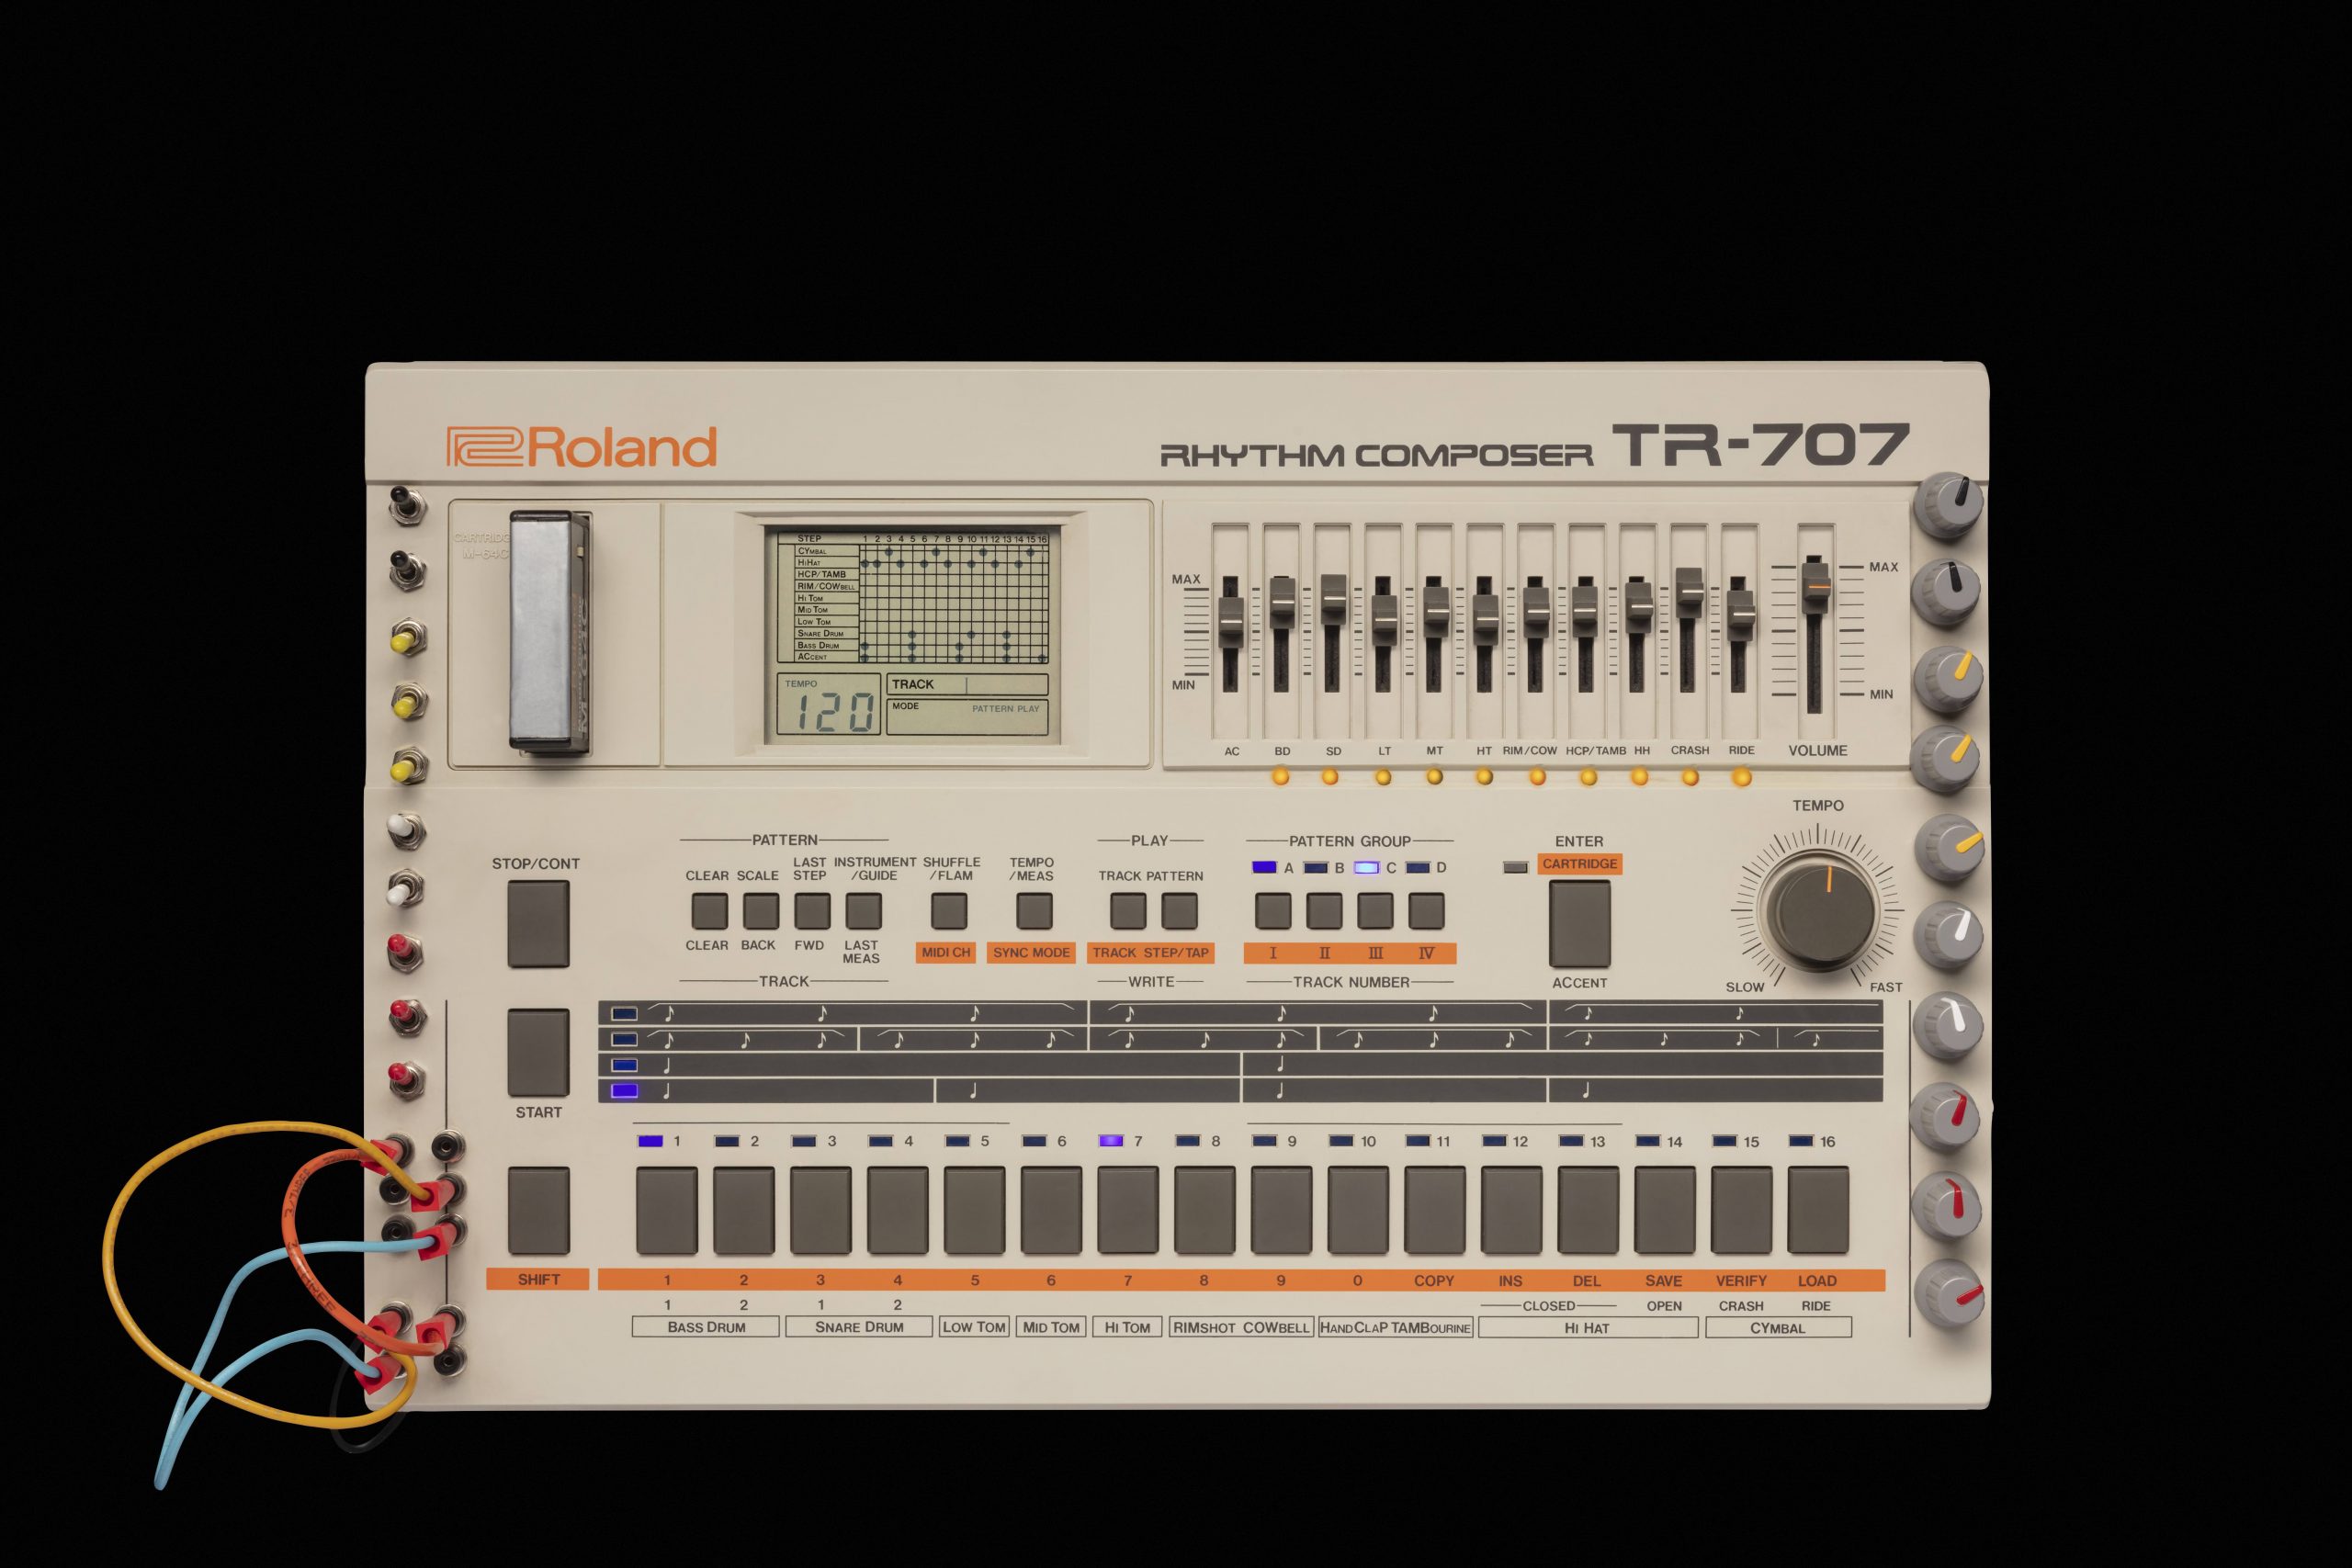 Mod Squad: A History of TR-707 and TR-727 Modifications - Roland 